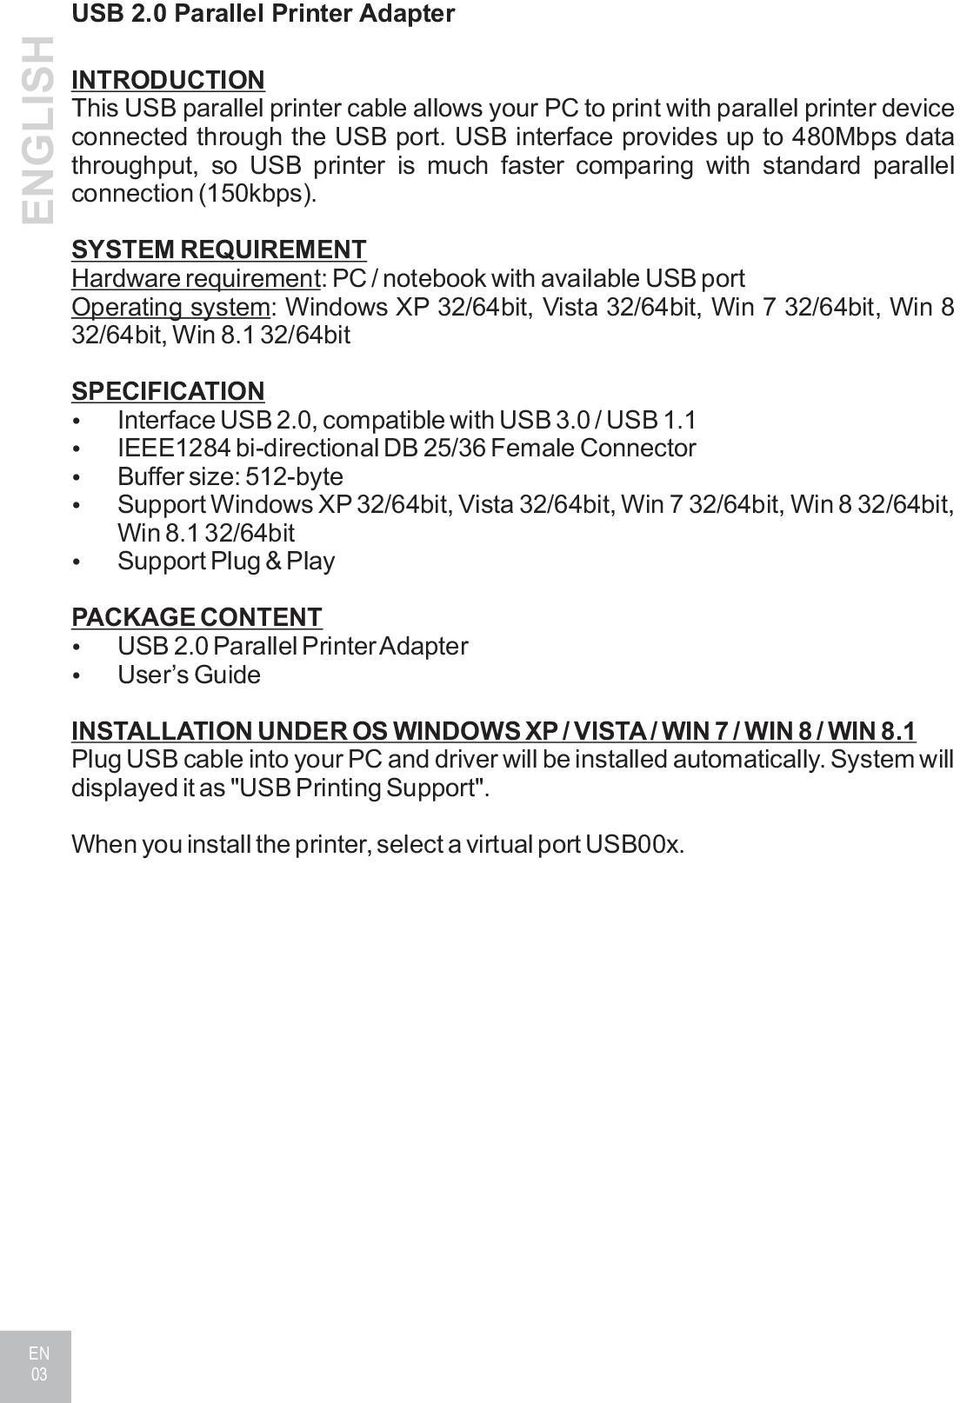 SYSTEM REQUIREMENT Hardware requirement: PC / notebook with available USB port Operating system: Windows XP 32/64bit, Vista 32/64bit, Win 7 32/64bit, Win 8 SPECIFICATION Interface USB 2.